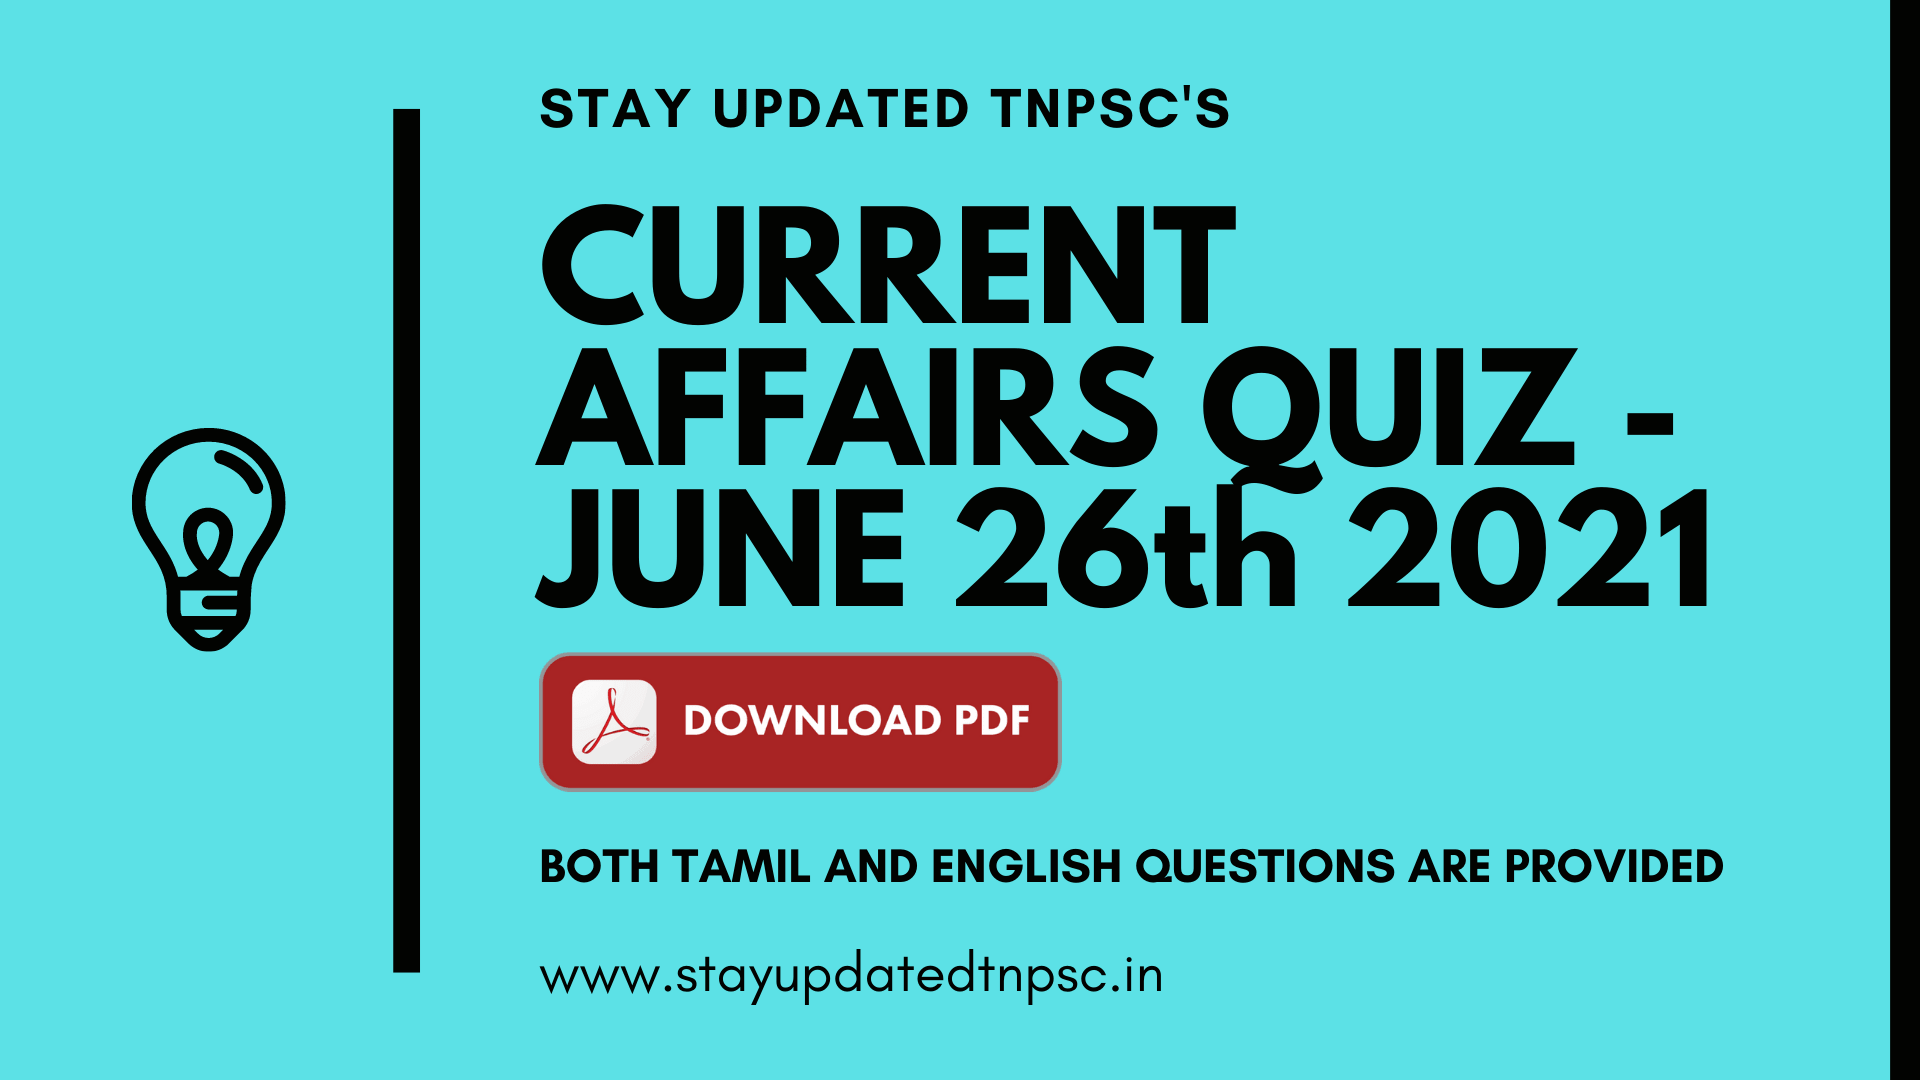 TNPSC DAILY CURRENT AFFAIRS: 26 JUNE 2021 TNPSC தினசரி நடப்பு நிகழ்வுகள்: 26 ஜூன் 2021 BOTH TAMIL AND ENGLISH QUESTIONS ARE PROVIDED DOWNLOAD PDF AT THE END OF THE QUESTIONS